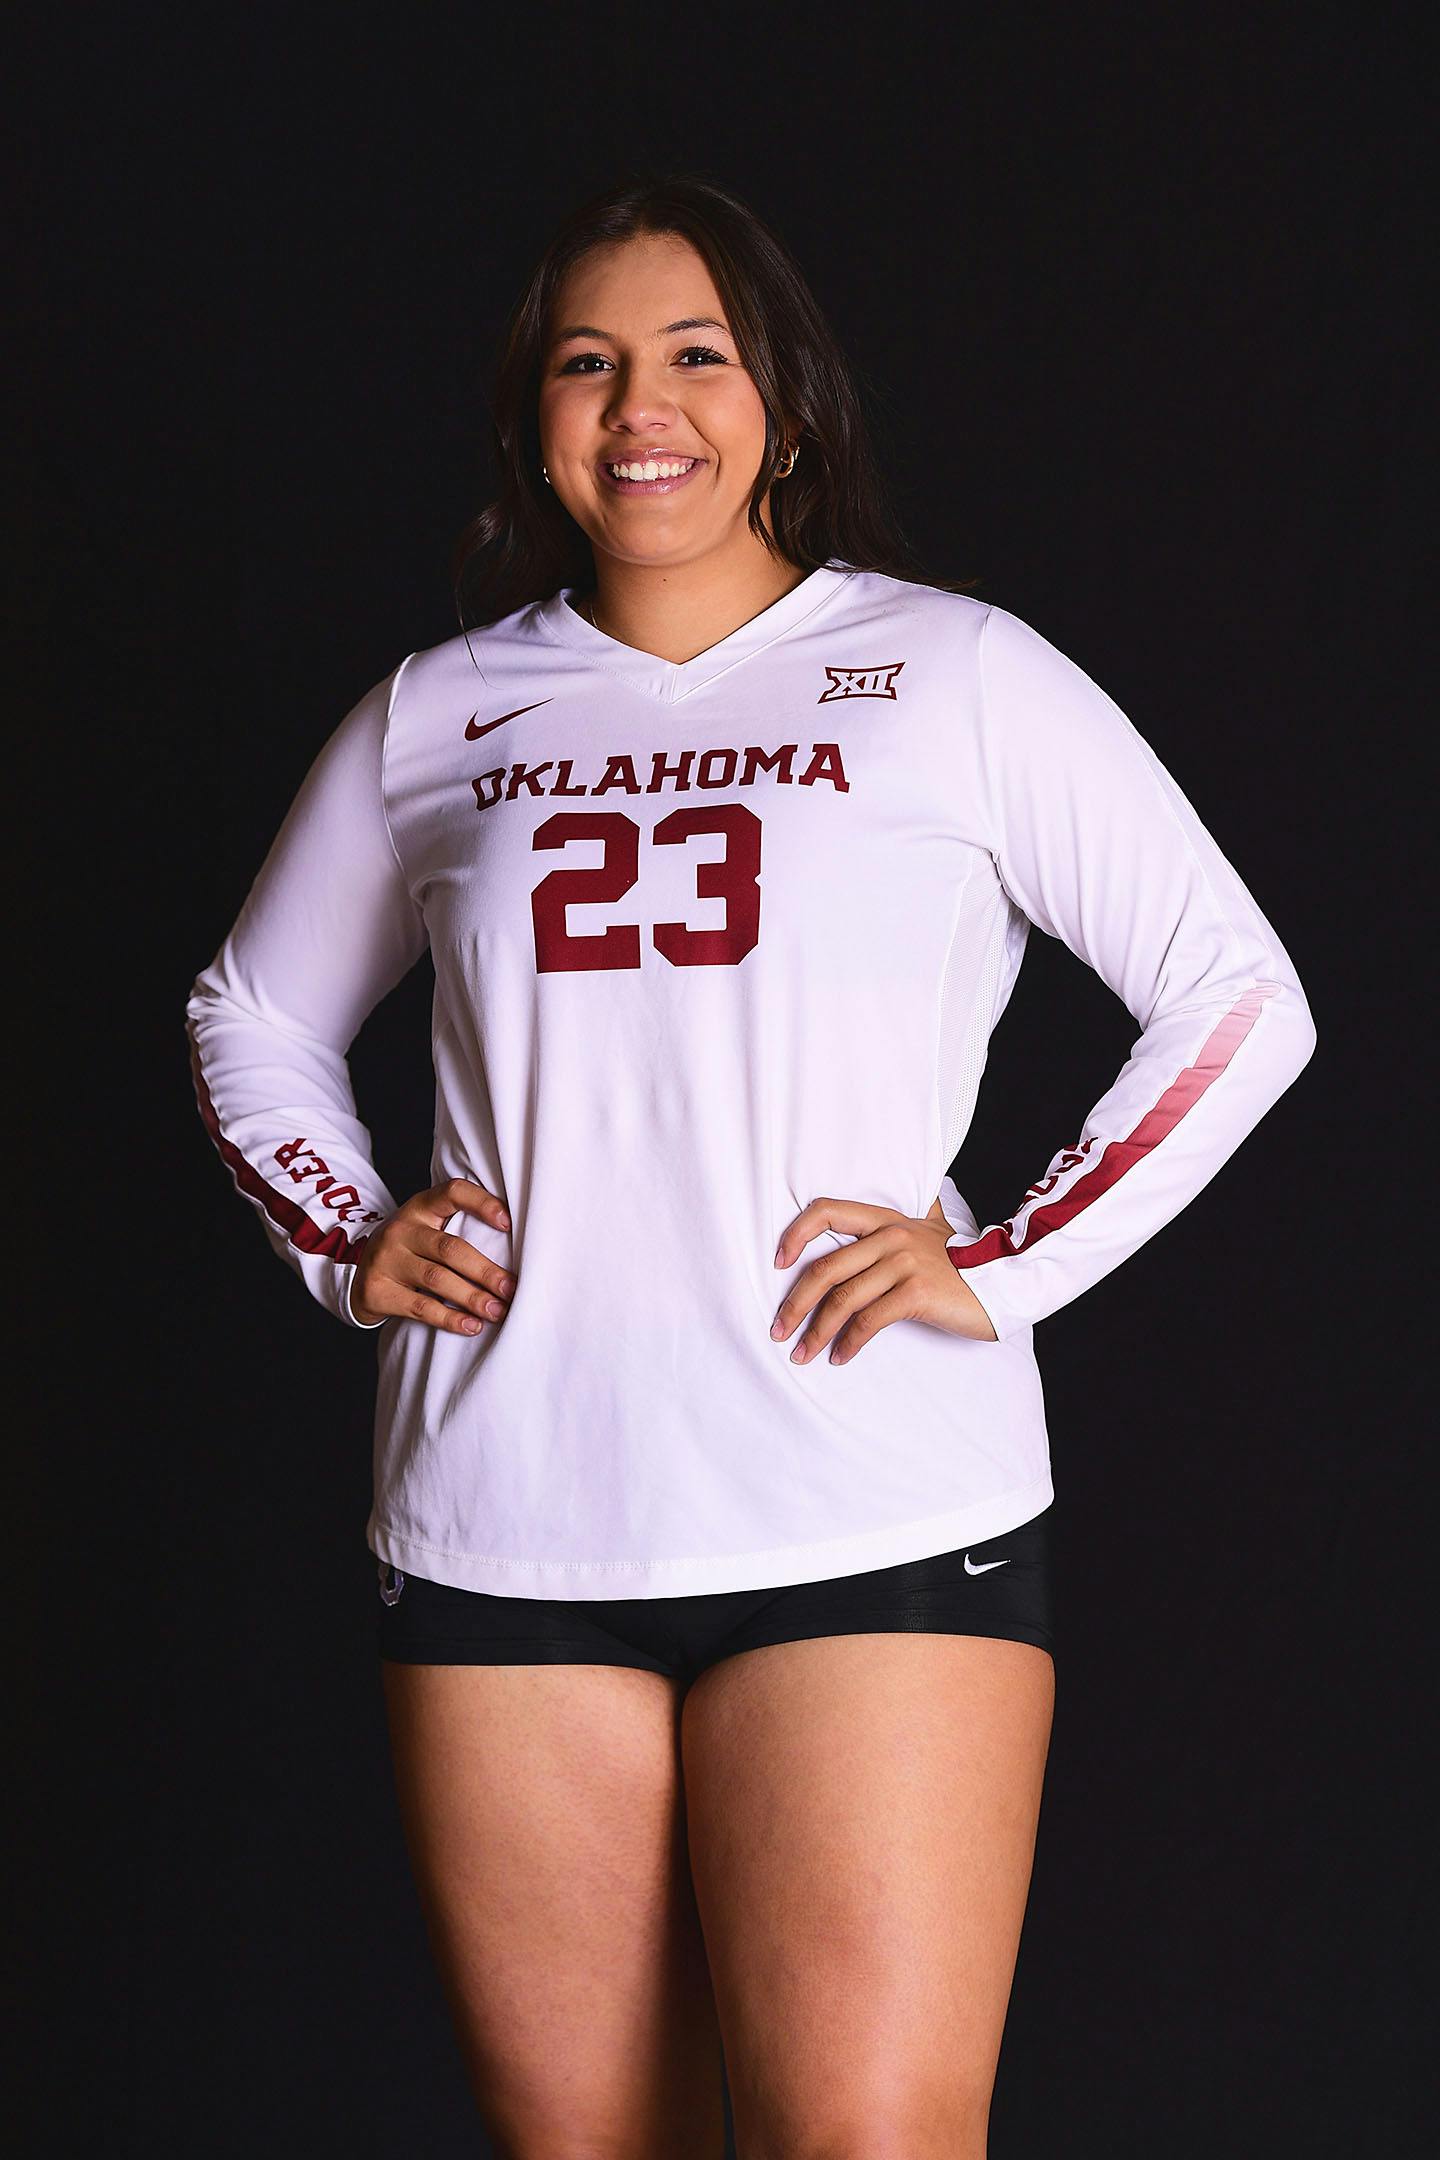 Mele's second picture wearing an OU jersey